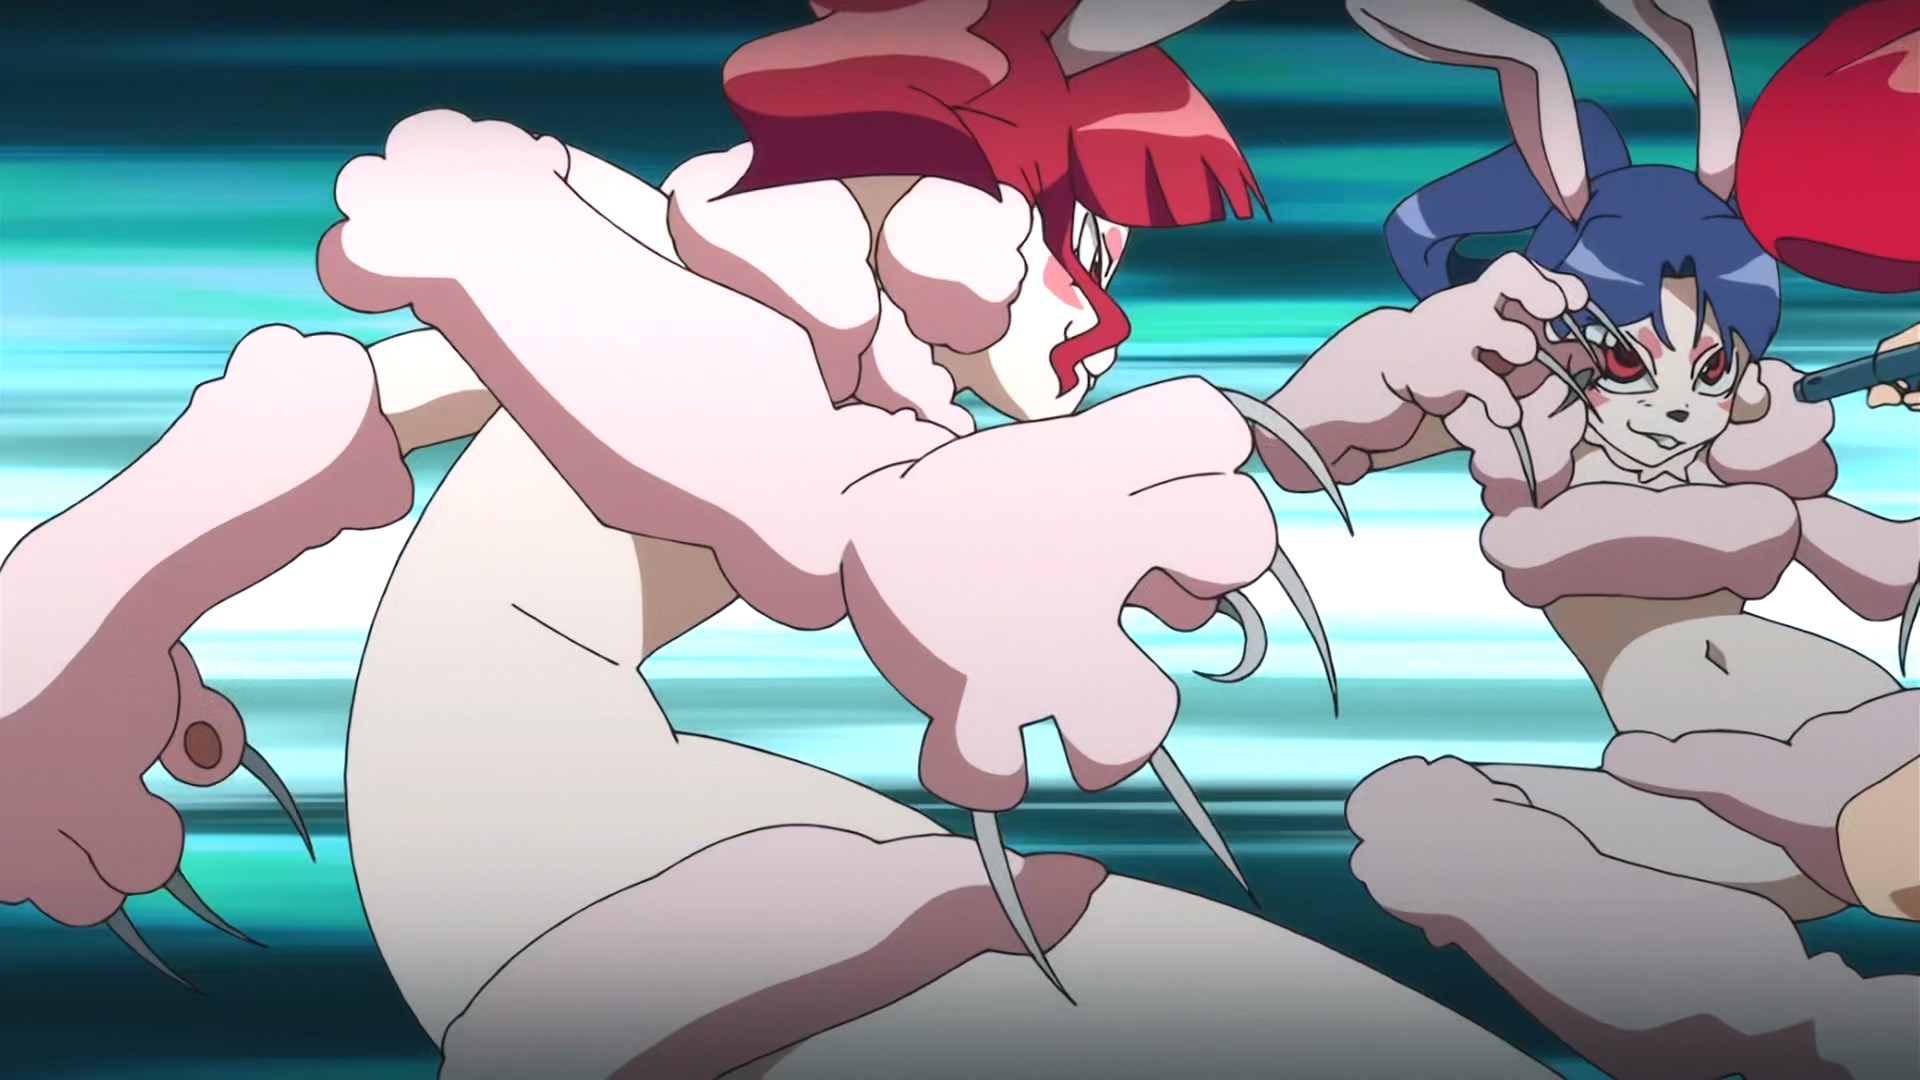 Who are these bunny girls from Gurren Lagann referencing? - Anime & Manga  Stack Exchange